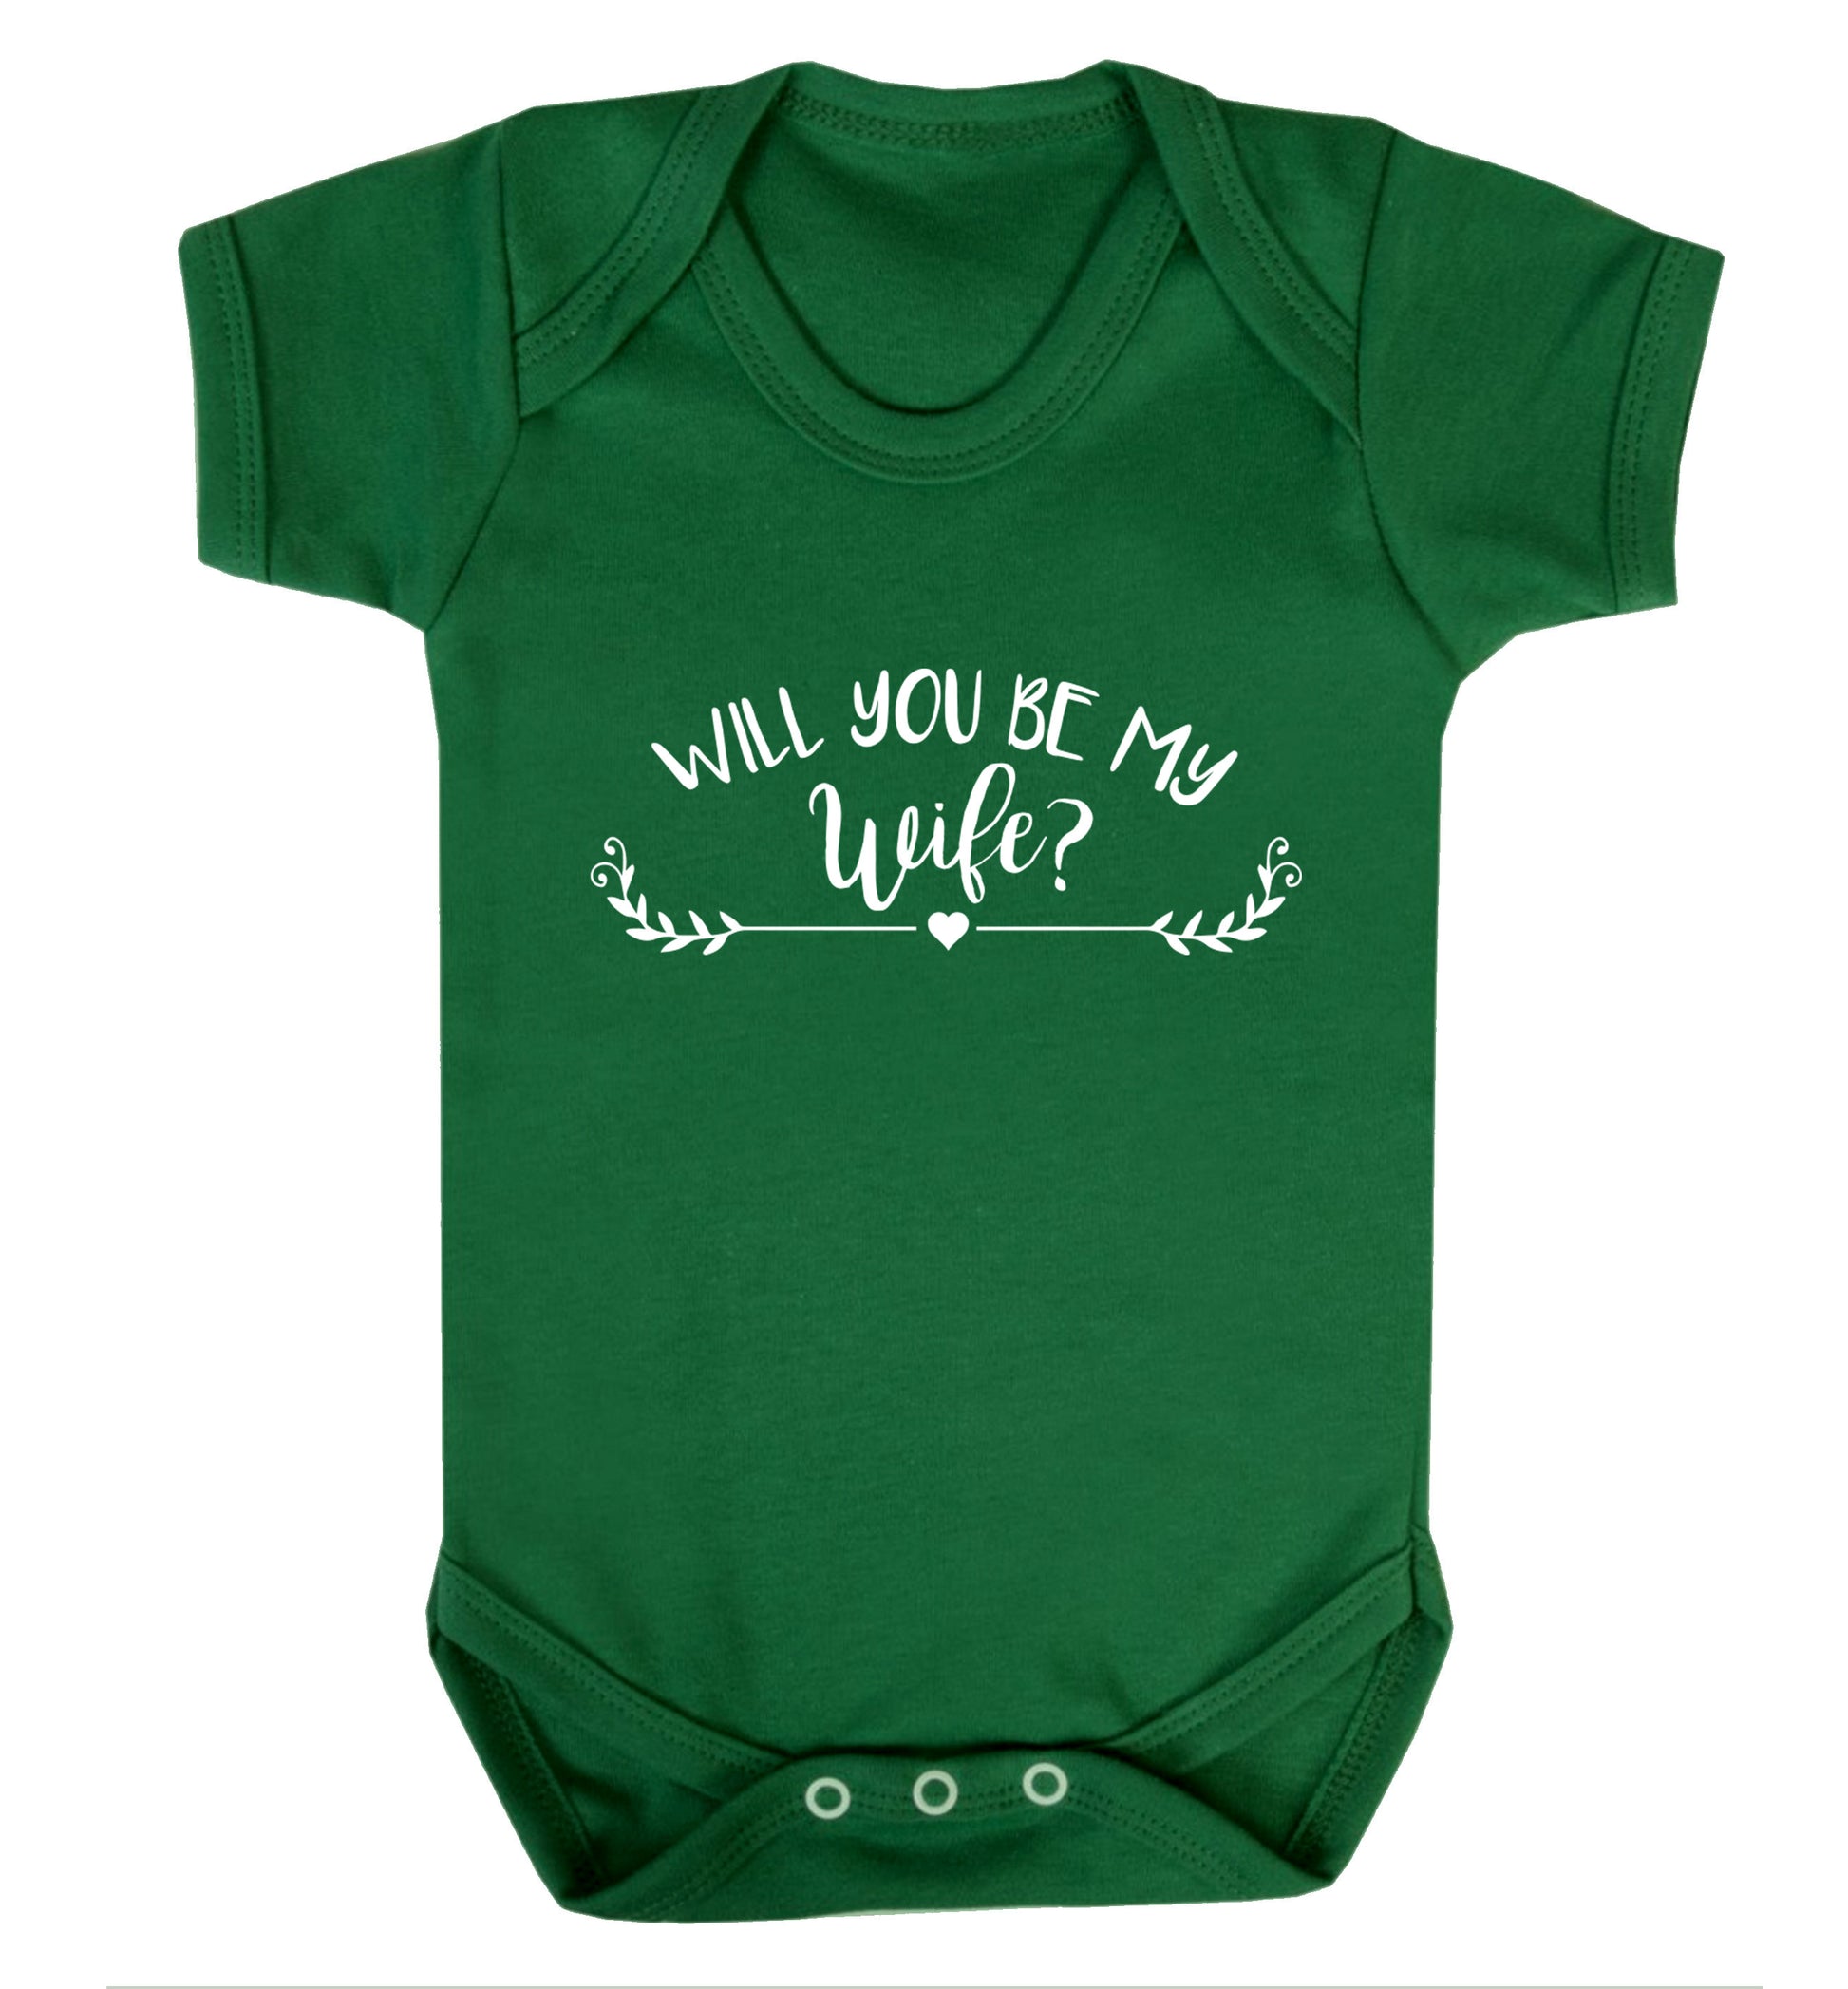 Will you be my wife? Baby Vest green 18-24 months